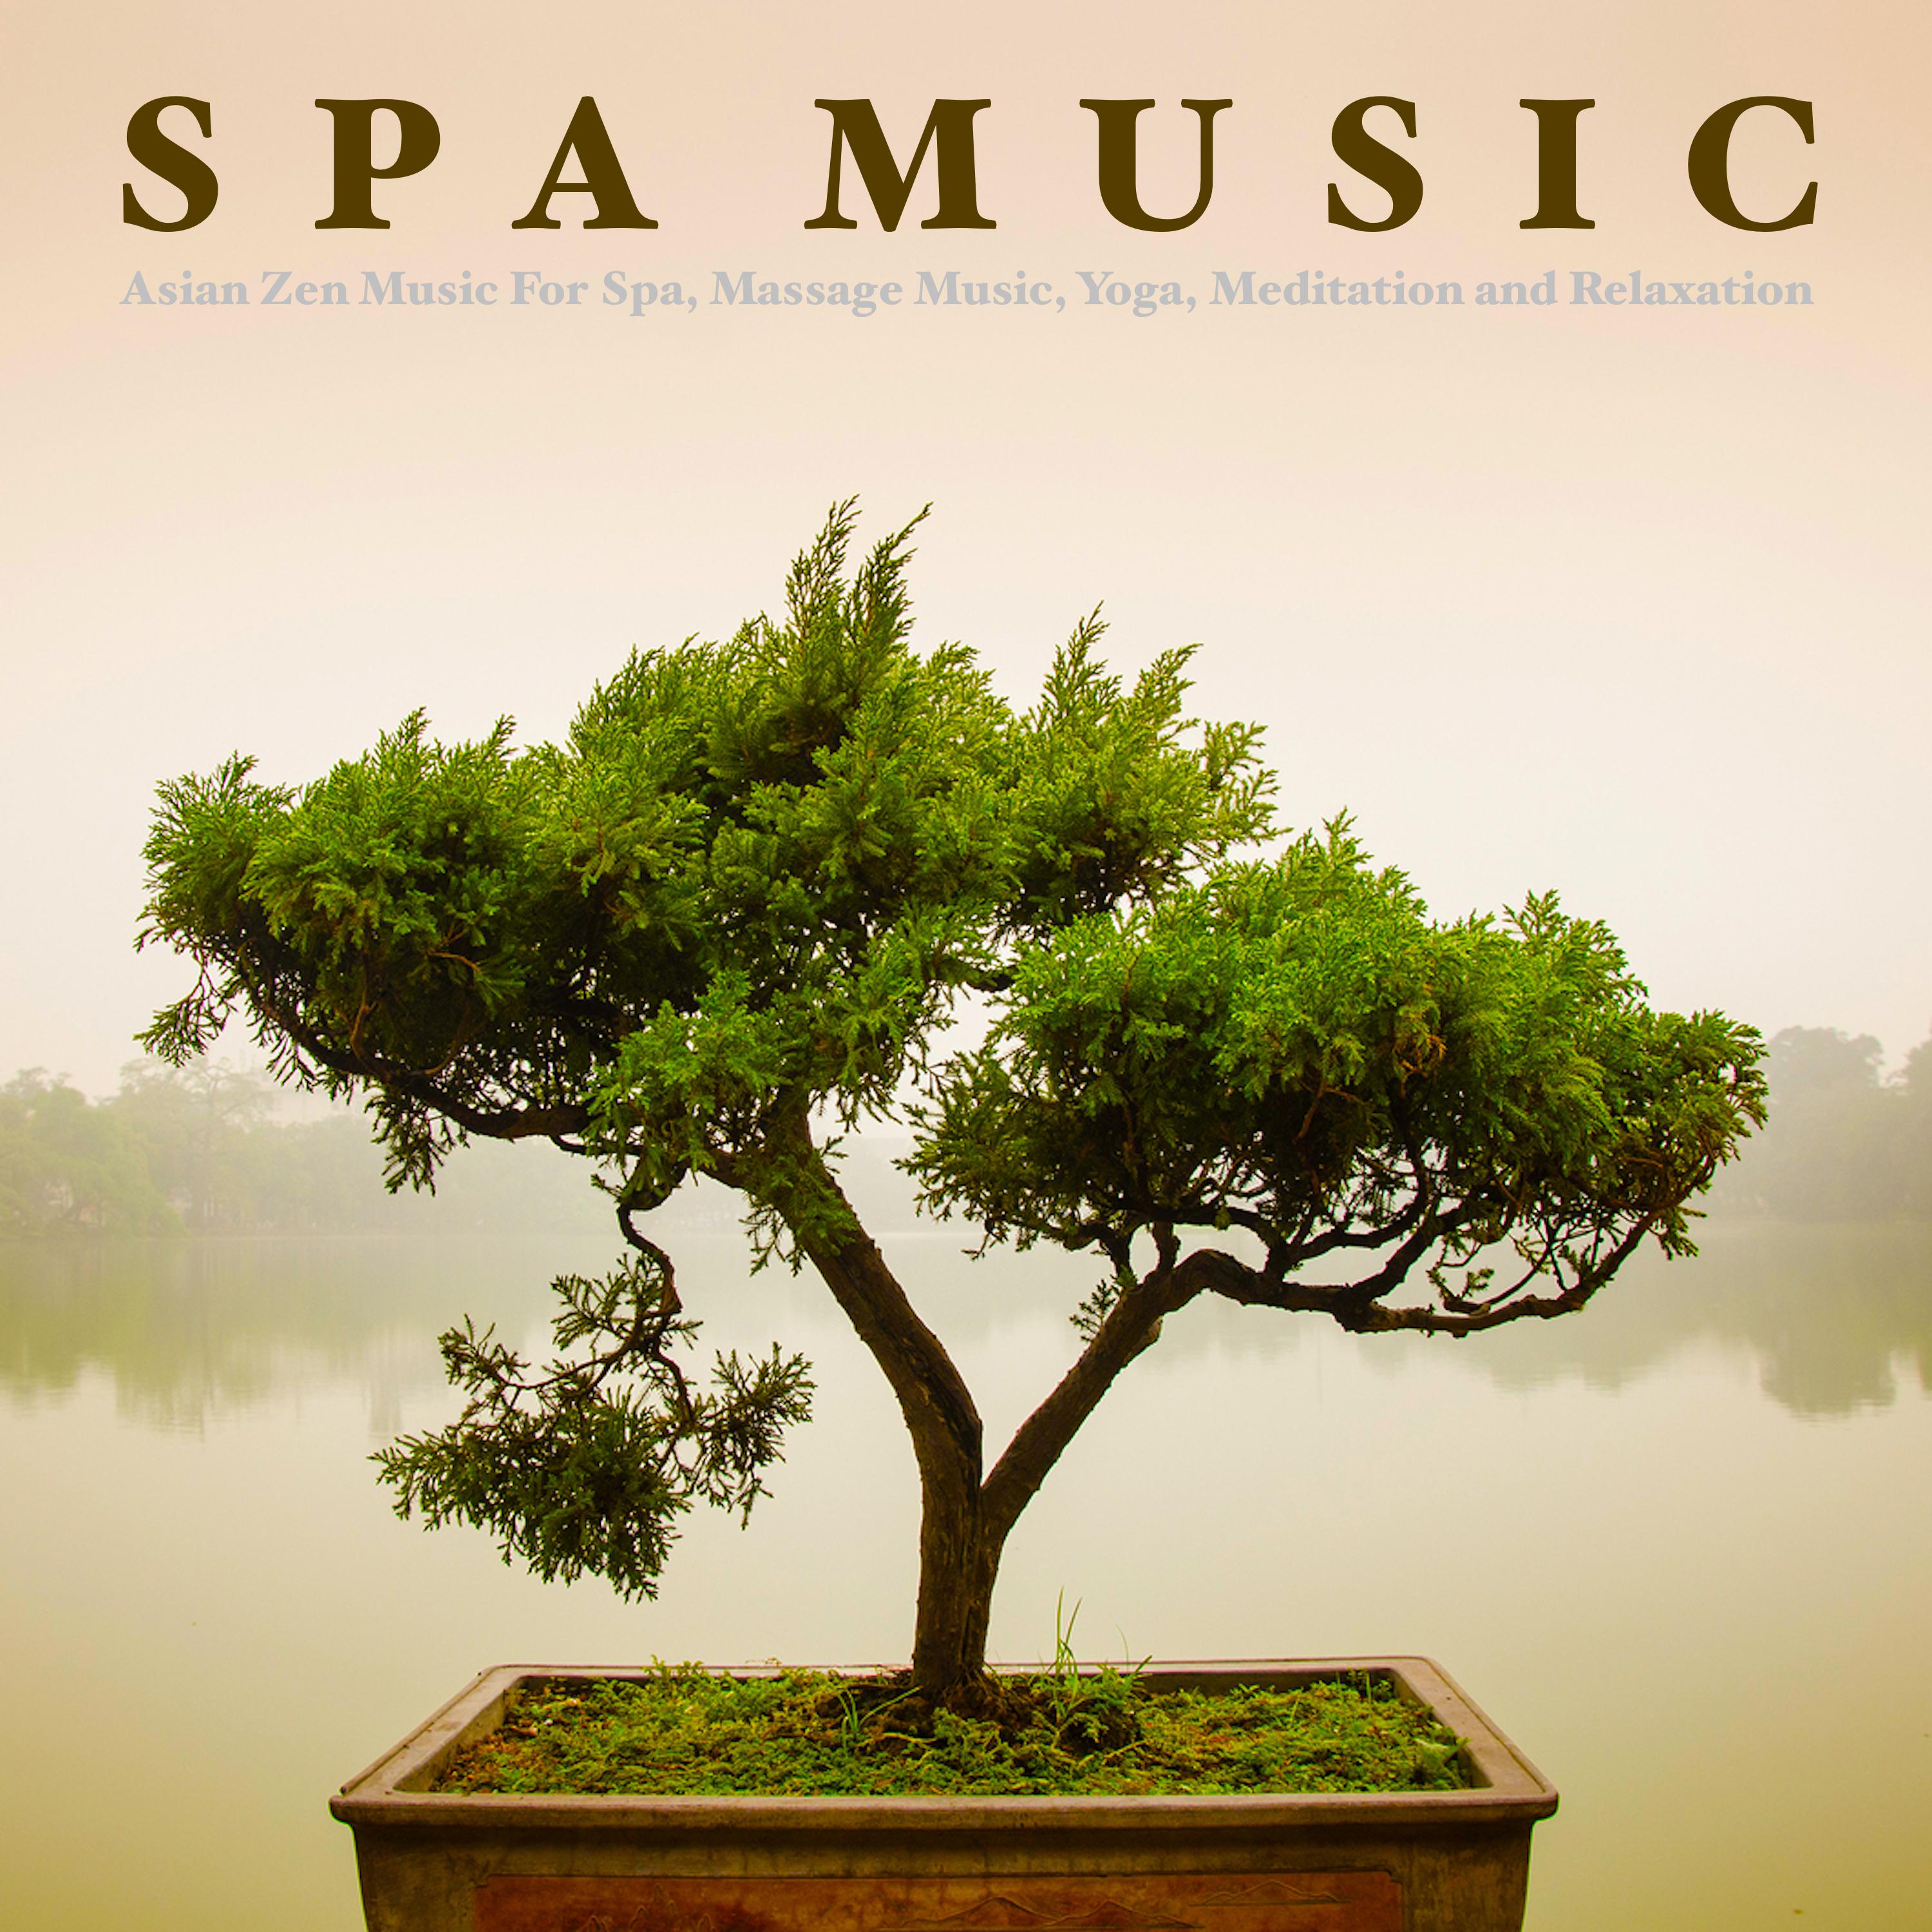 Spa Music: Asian Zen Music For Spa, Massage Music, Yoga, Meditation and Relaxation